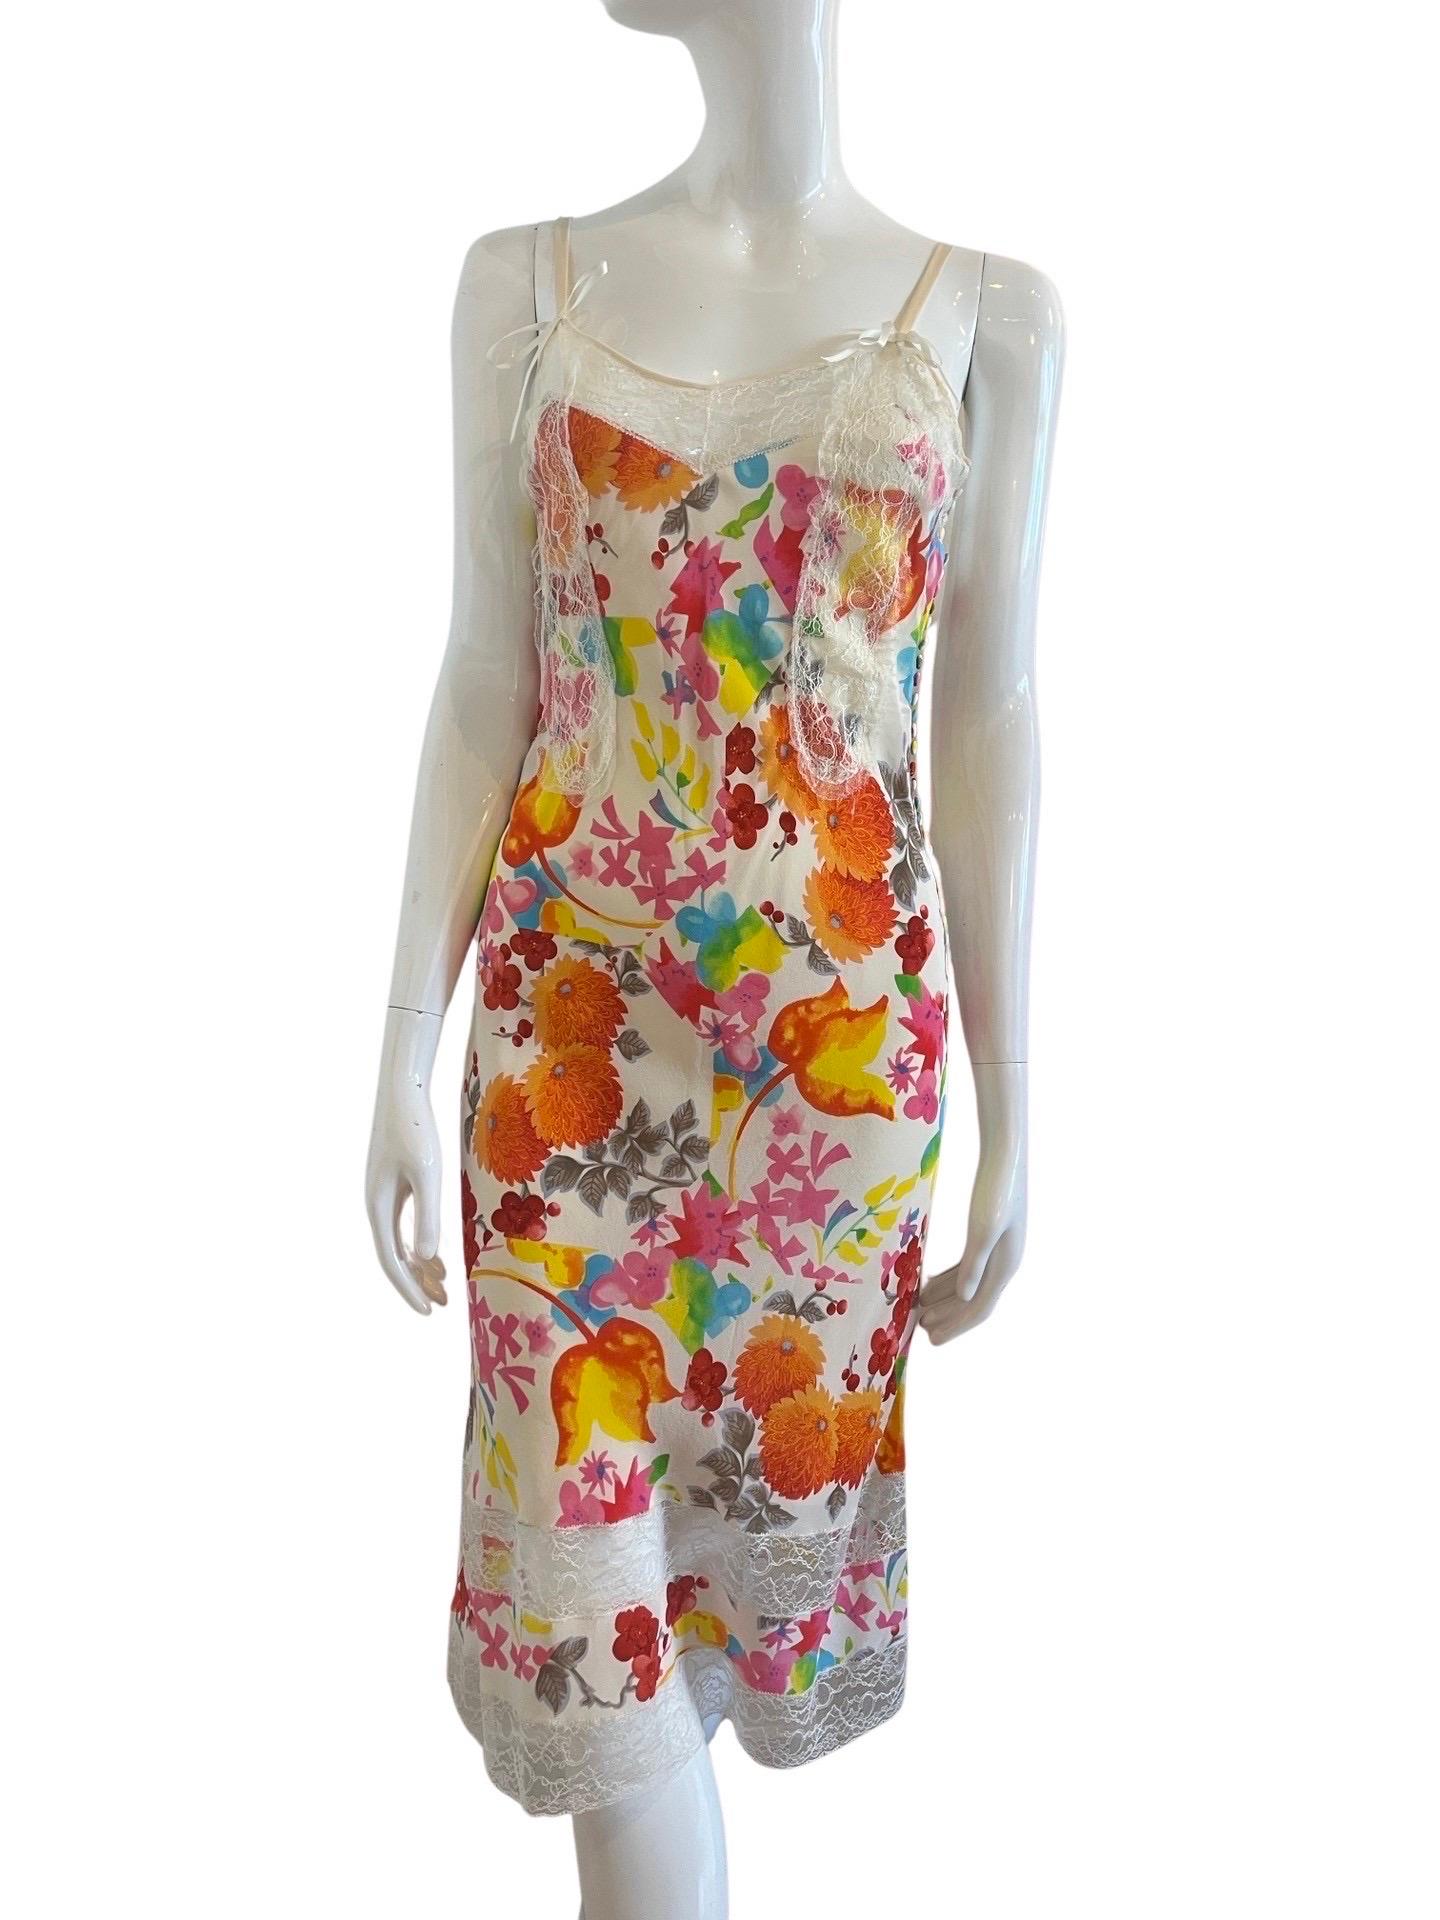 Women's 2000s Christian Dior by John Galliano Floral Dress For Sale